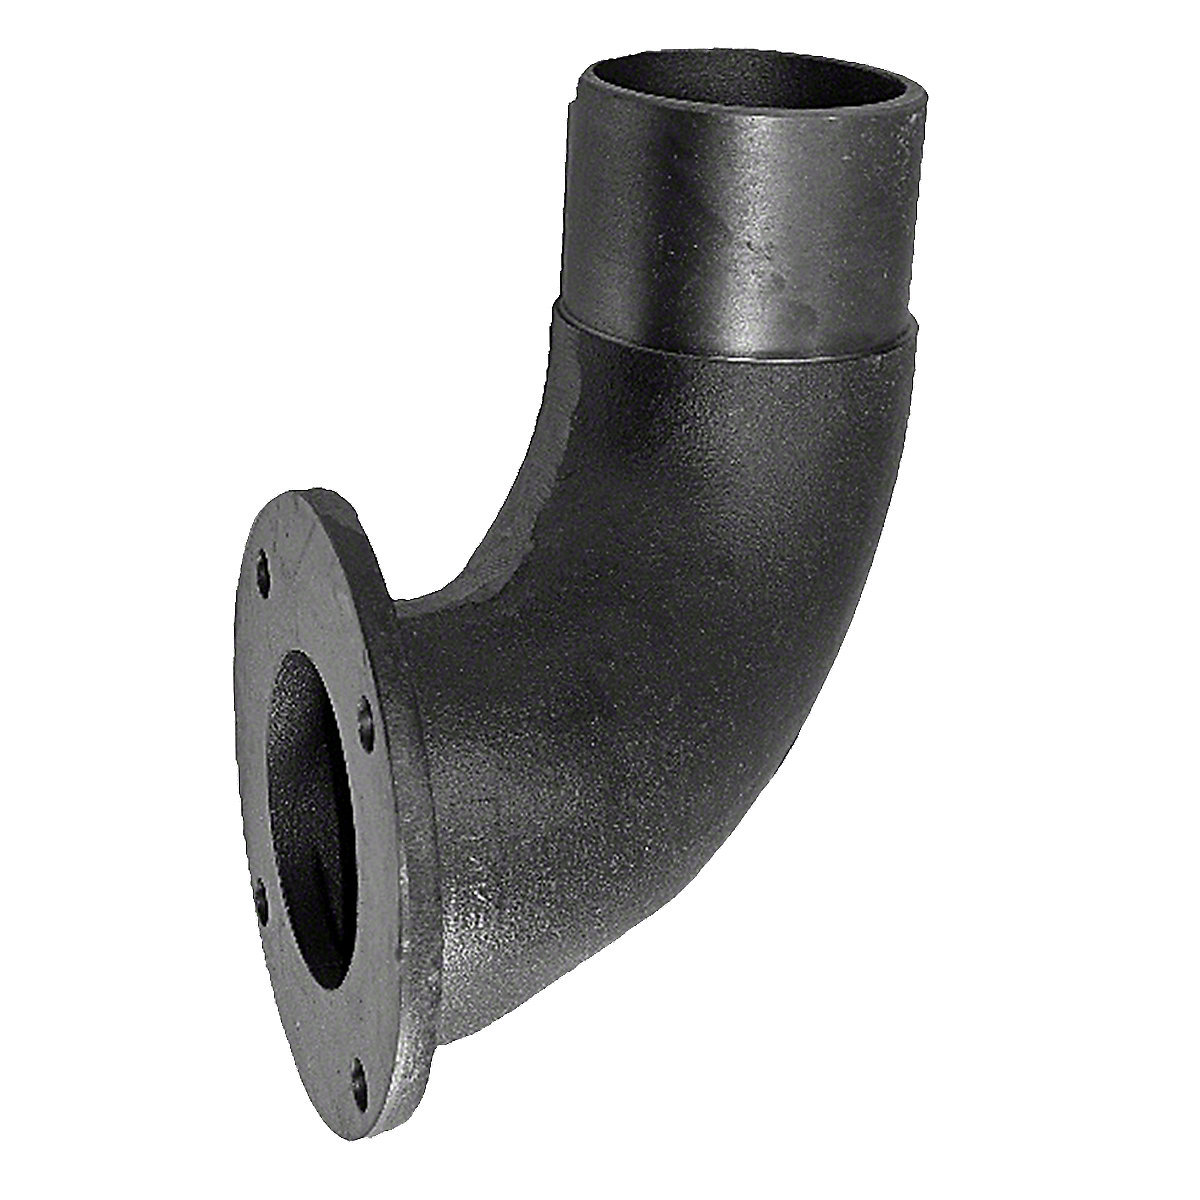 Exhaust Turbo Elbow For Allis Chalmers D19, D21, 210, 220, 7000, 7010, 7020